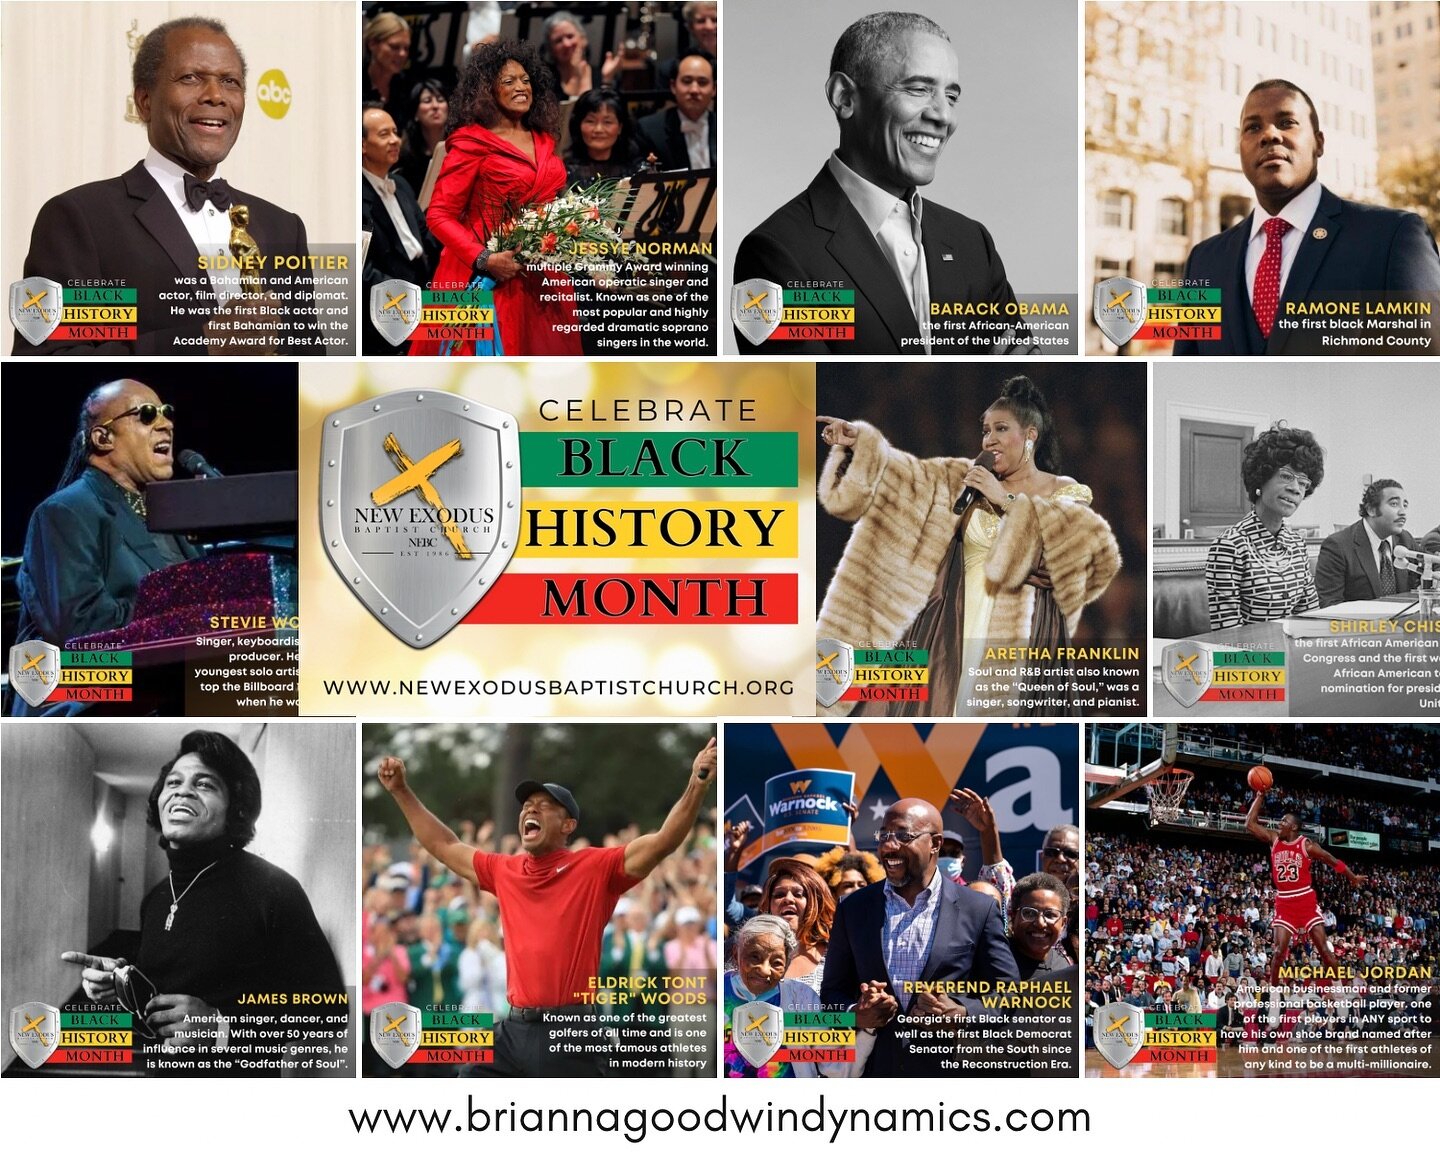 Today ends Black History Month, but our history lives on! ✊🏾❤️

Here&rsquo;s a recap of BHM posts created for NEBC this year! 

www.briannagoodwindynamics.com ⚡️